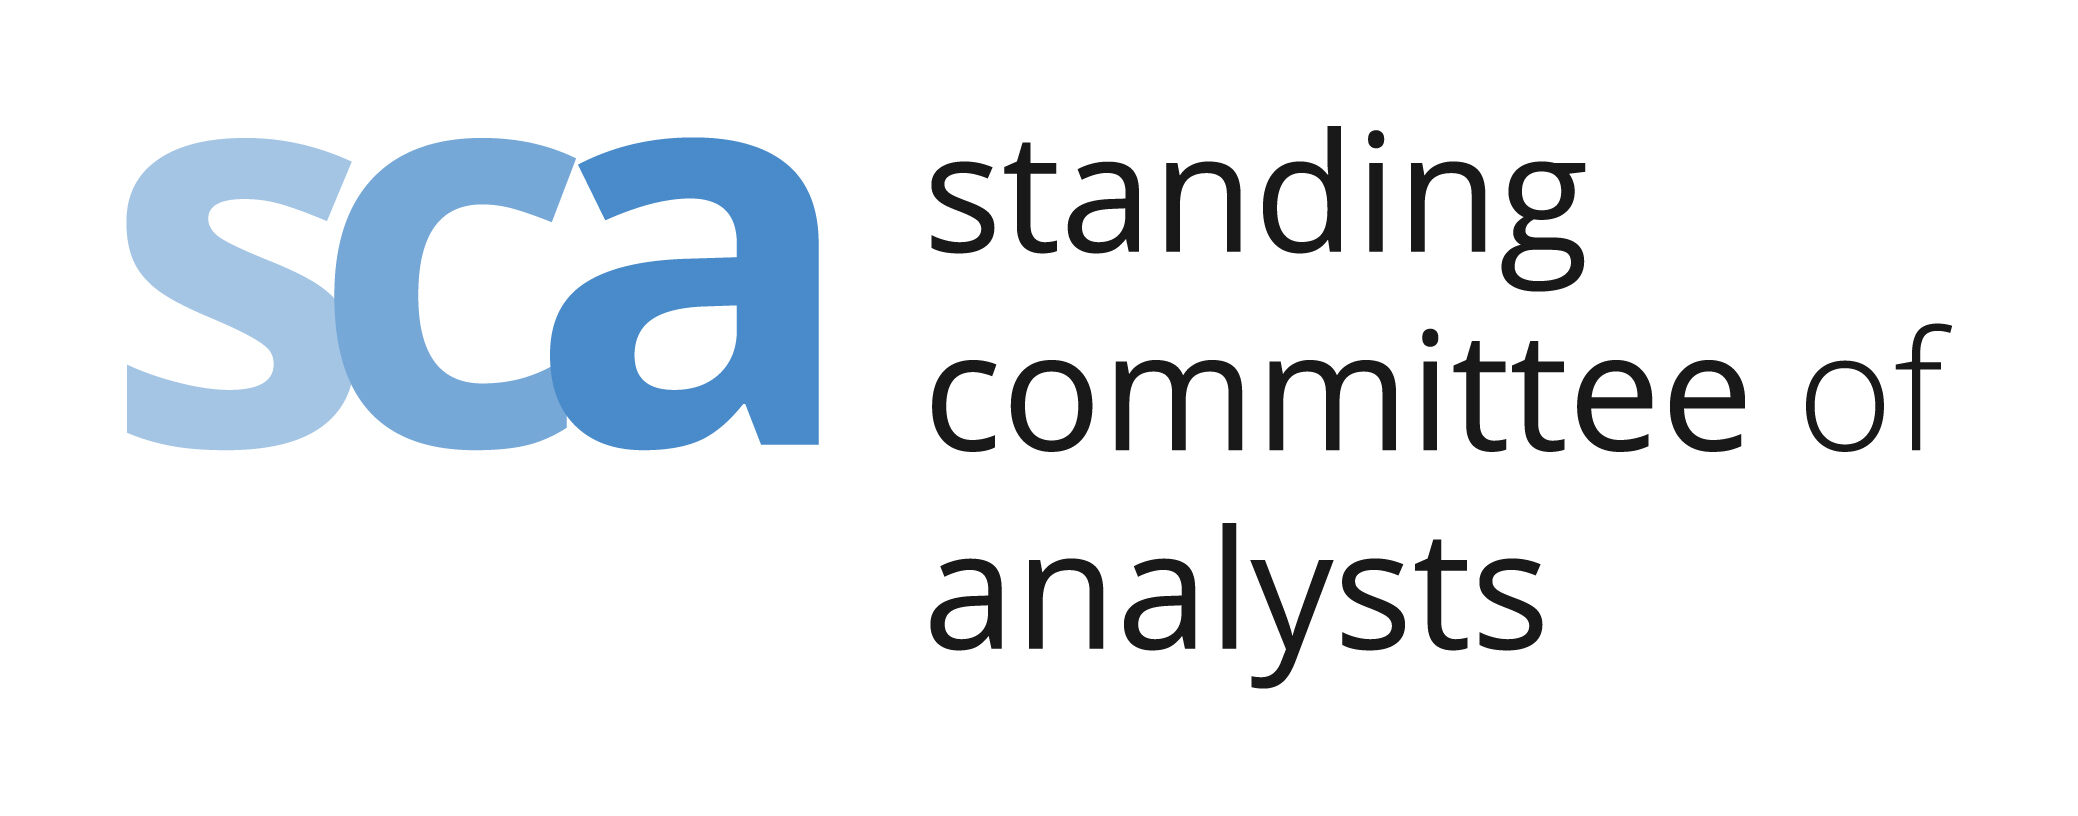 Standing Committee of Analysts